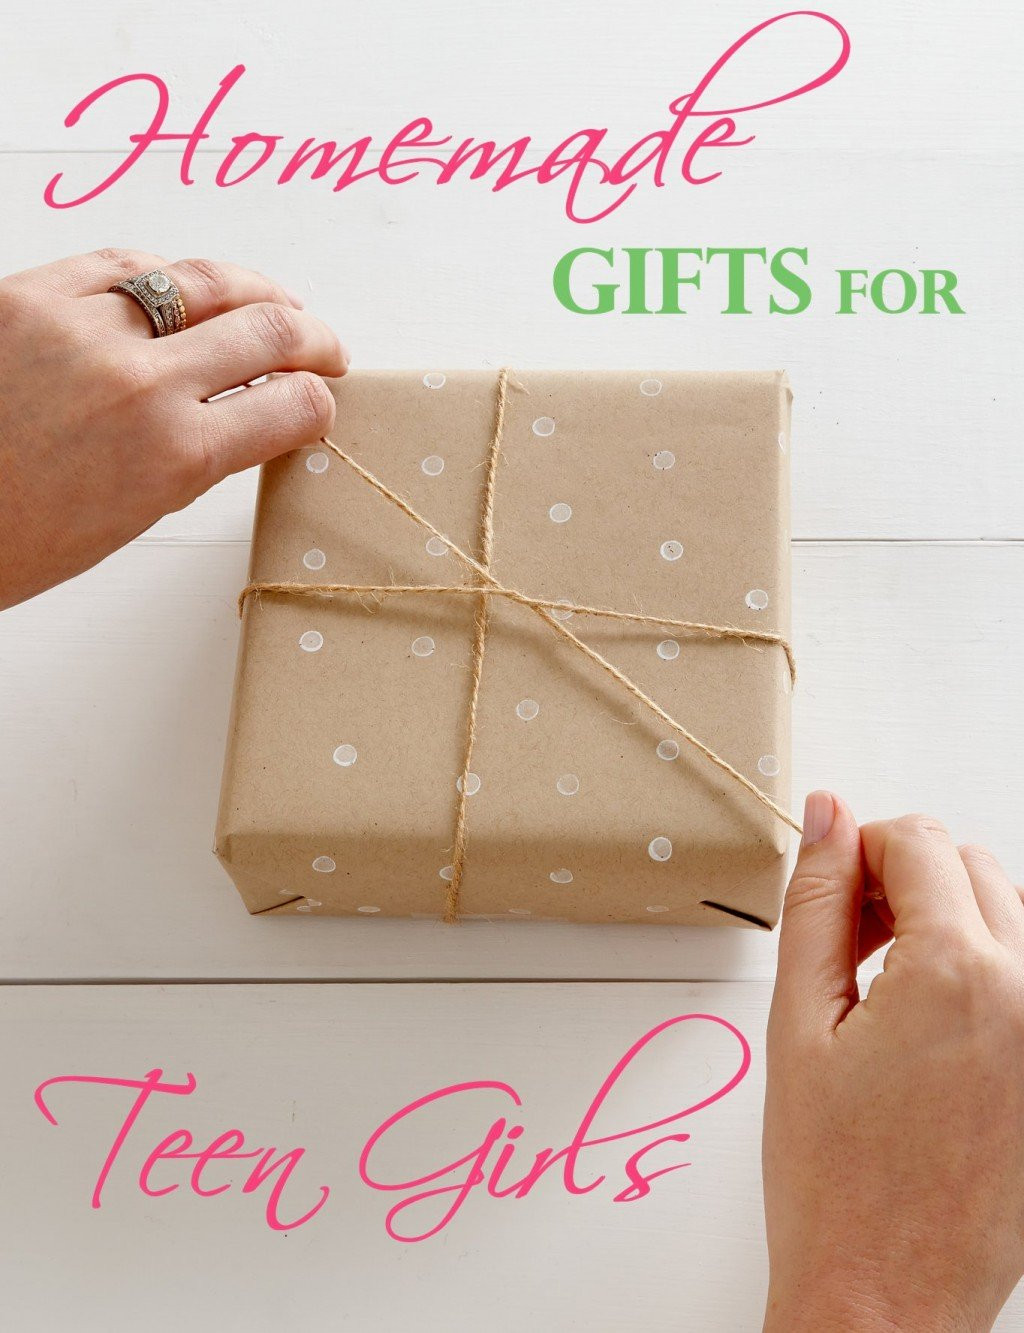 Birthday Gift Ideas For Teen Girls
 Fab Homemade Gifts for Teen Girls That Look Store Bought